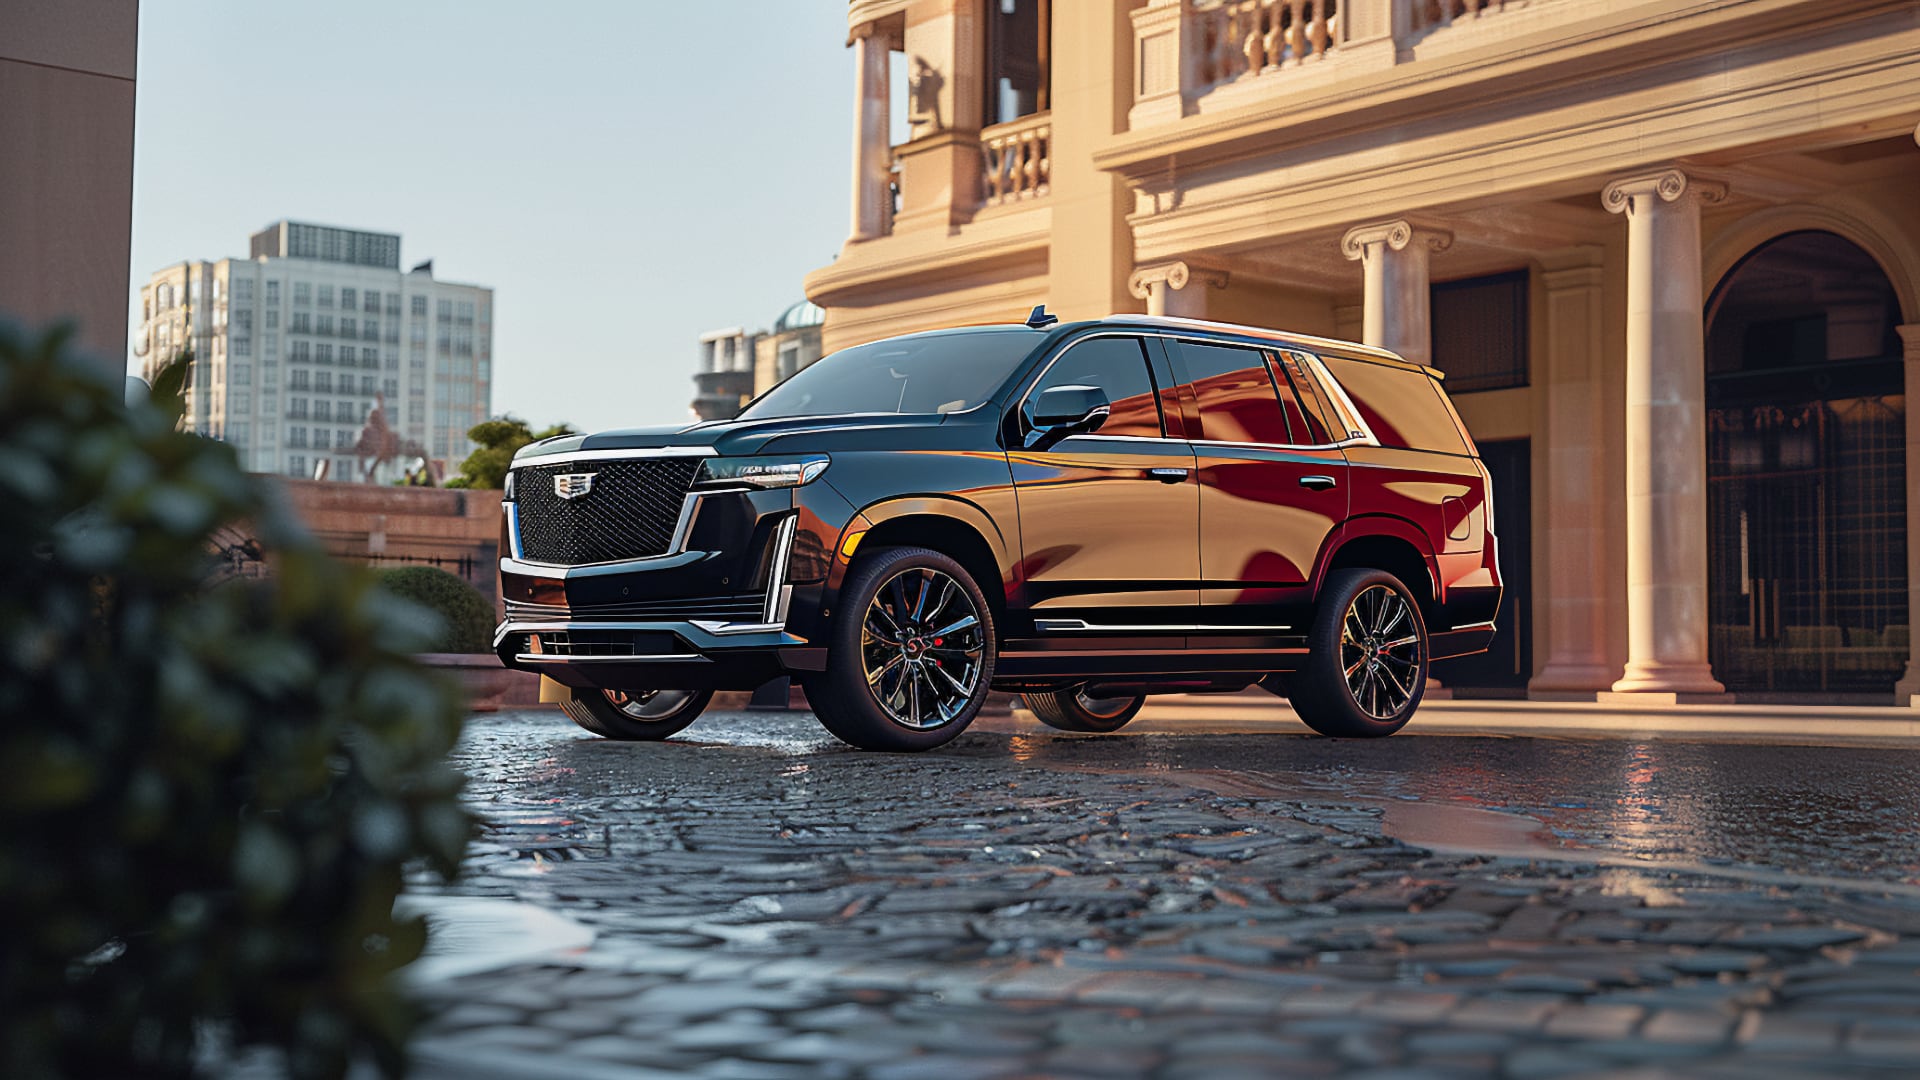 The 2020 Cadillac Escalade, a year to avoid, is parked in front of a building.